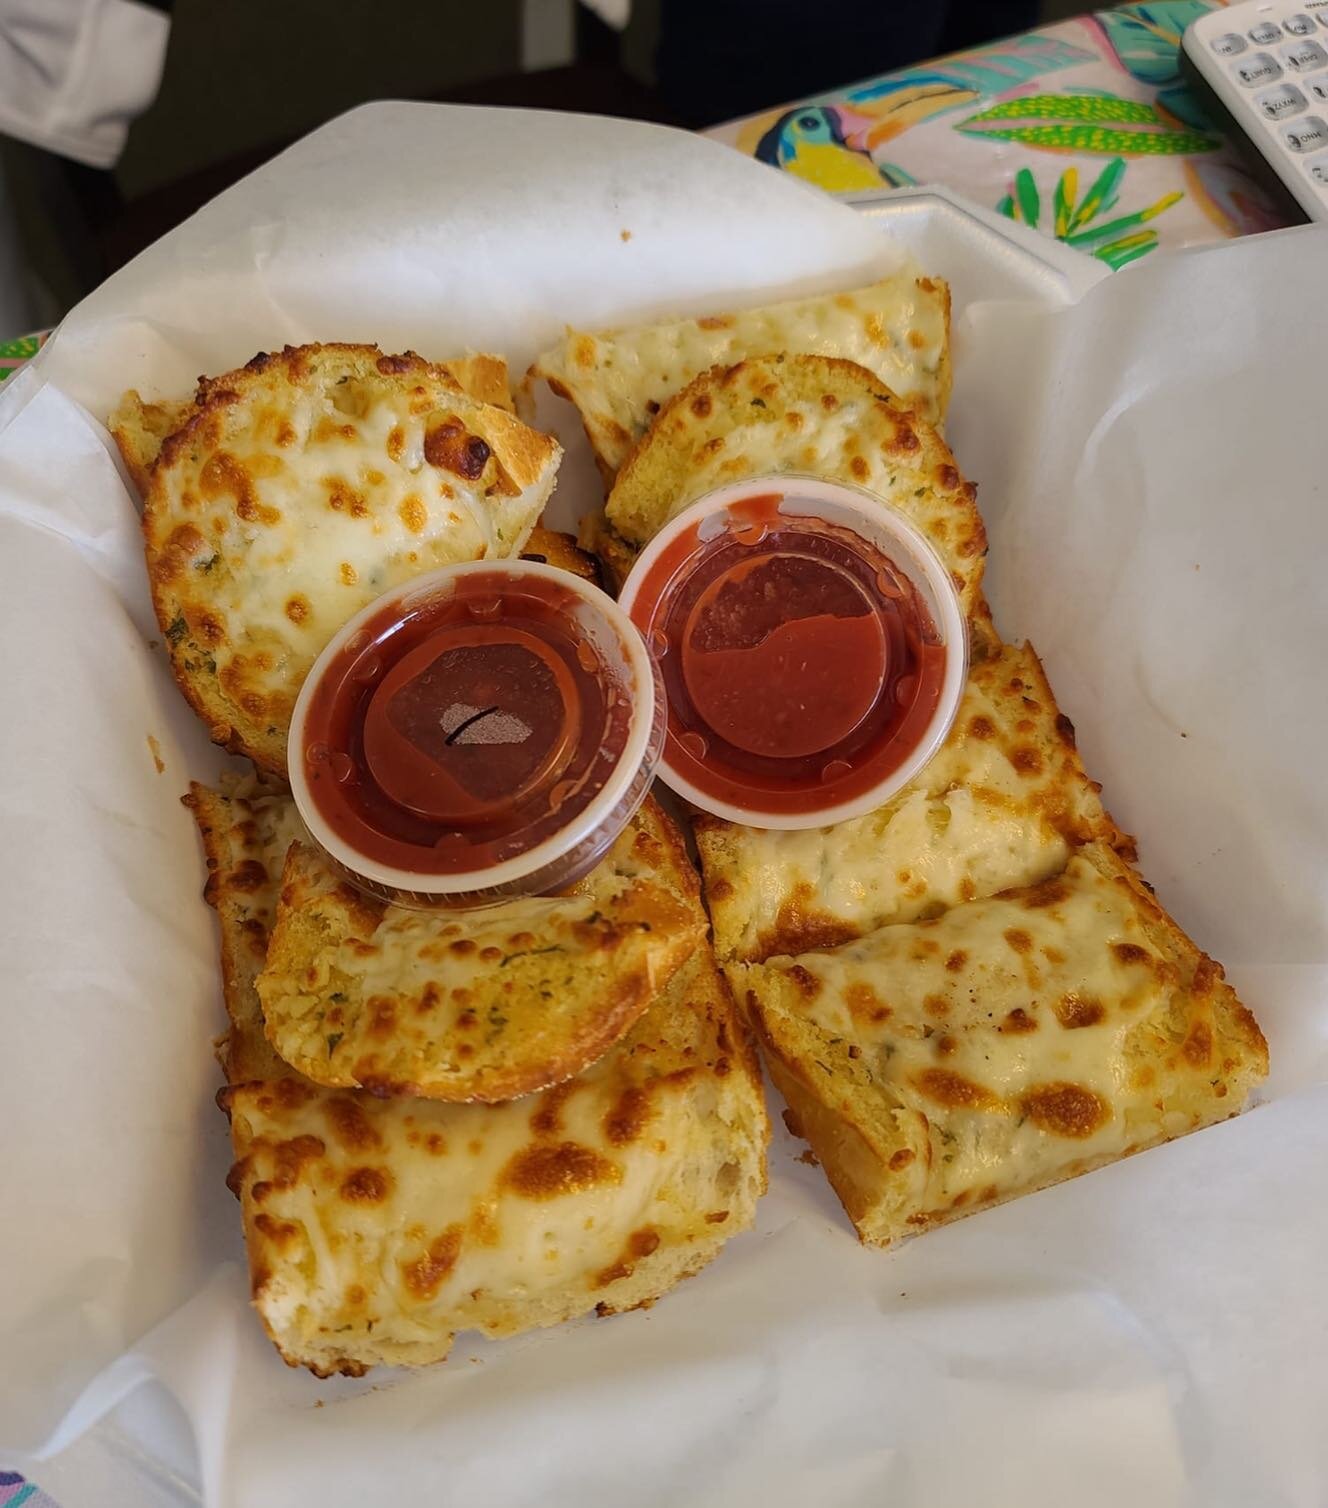 The best things in life are cheese. 

Try our cheesy bread today! 🥖🧀